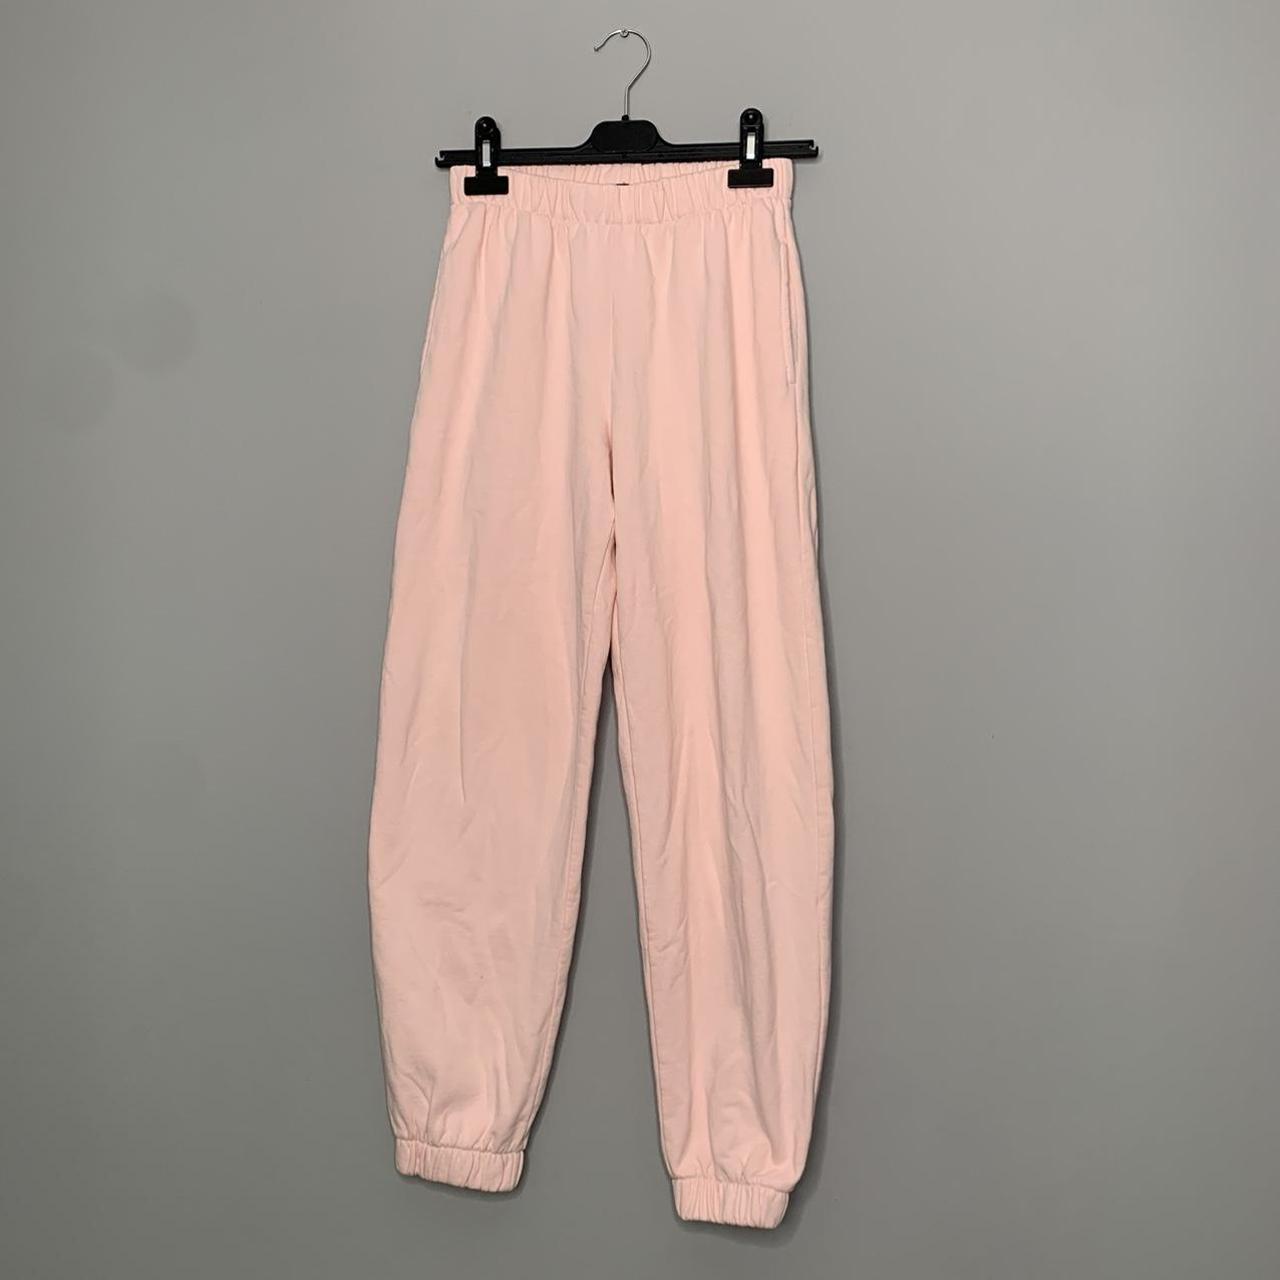 Pink Brandy Melville joggers, one size fits up to a... - Depop